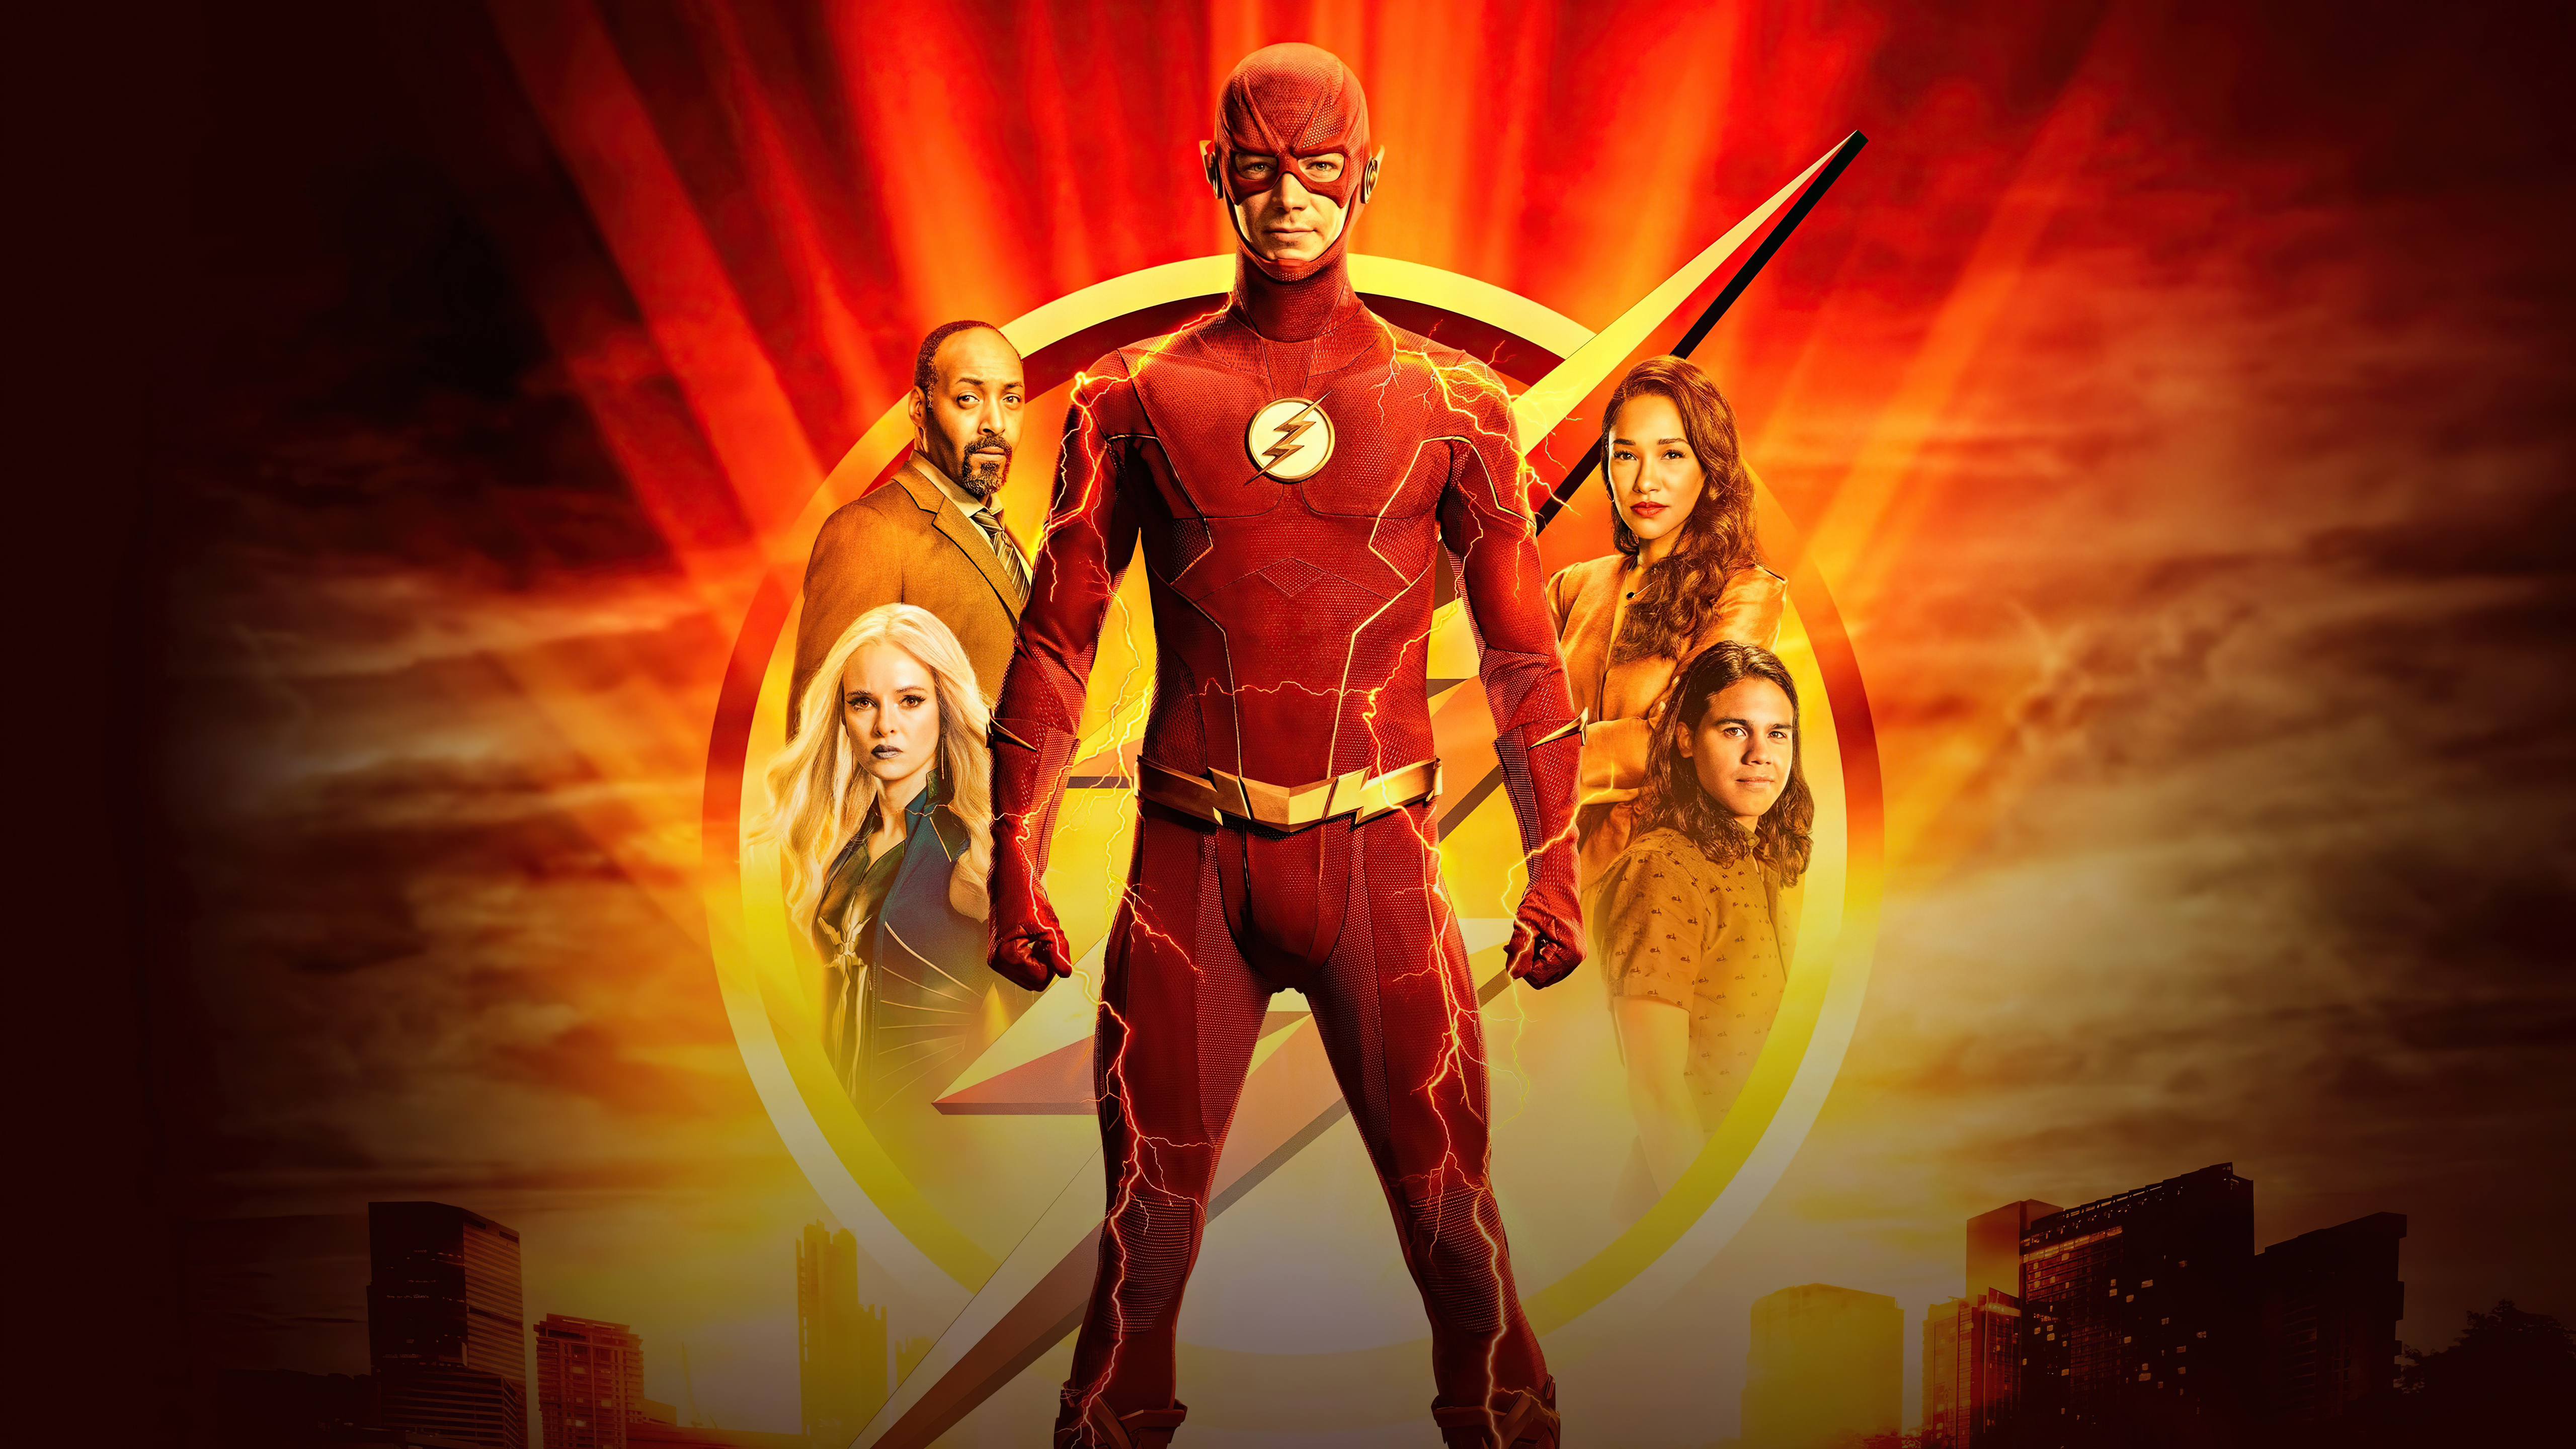 The Flash (2014) Wallpapers